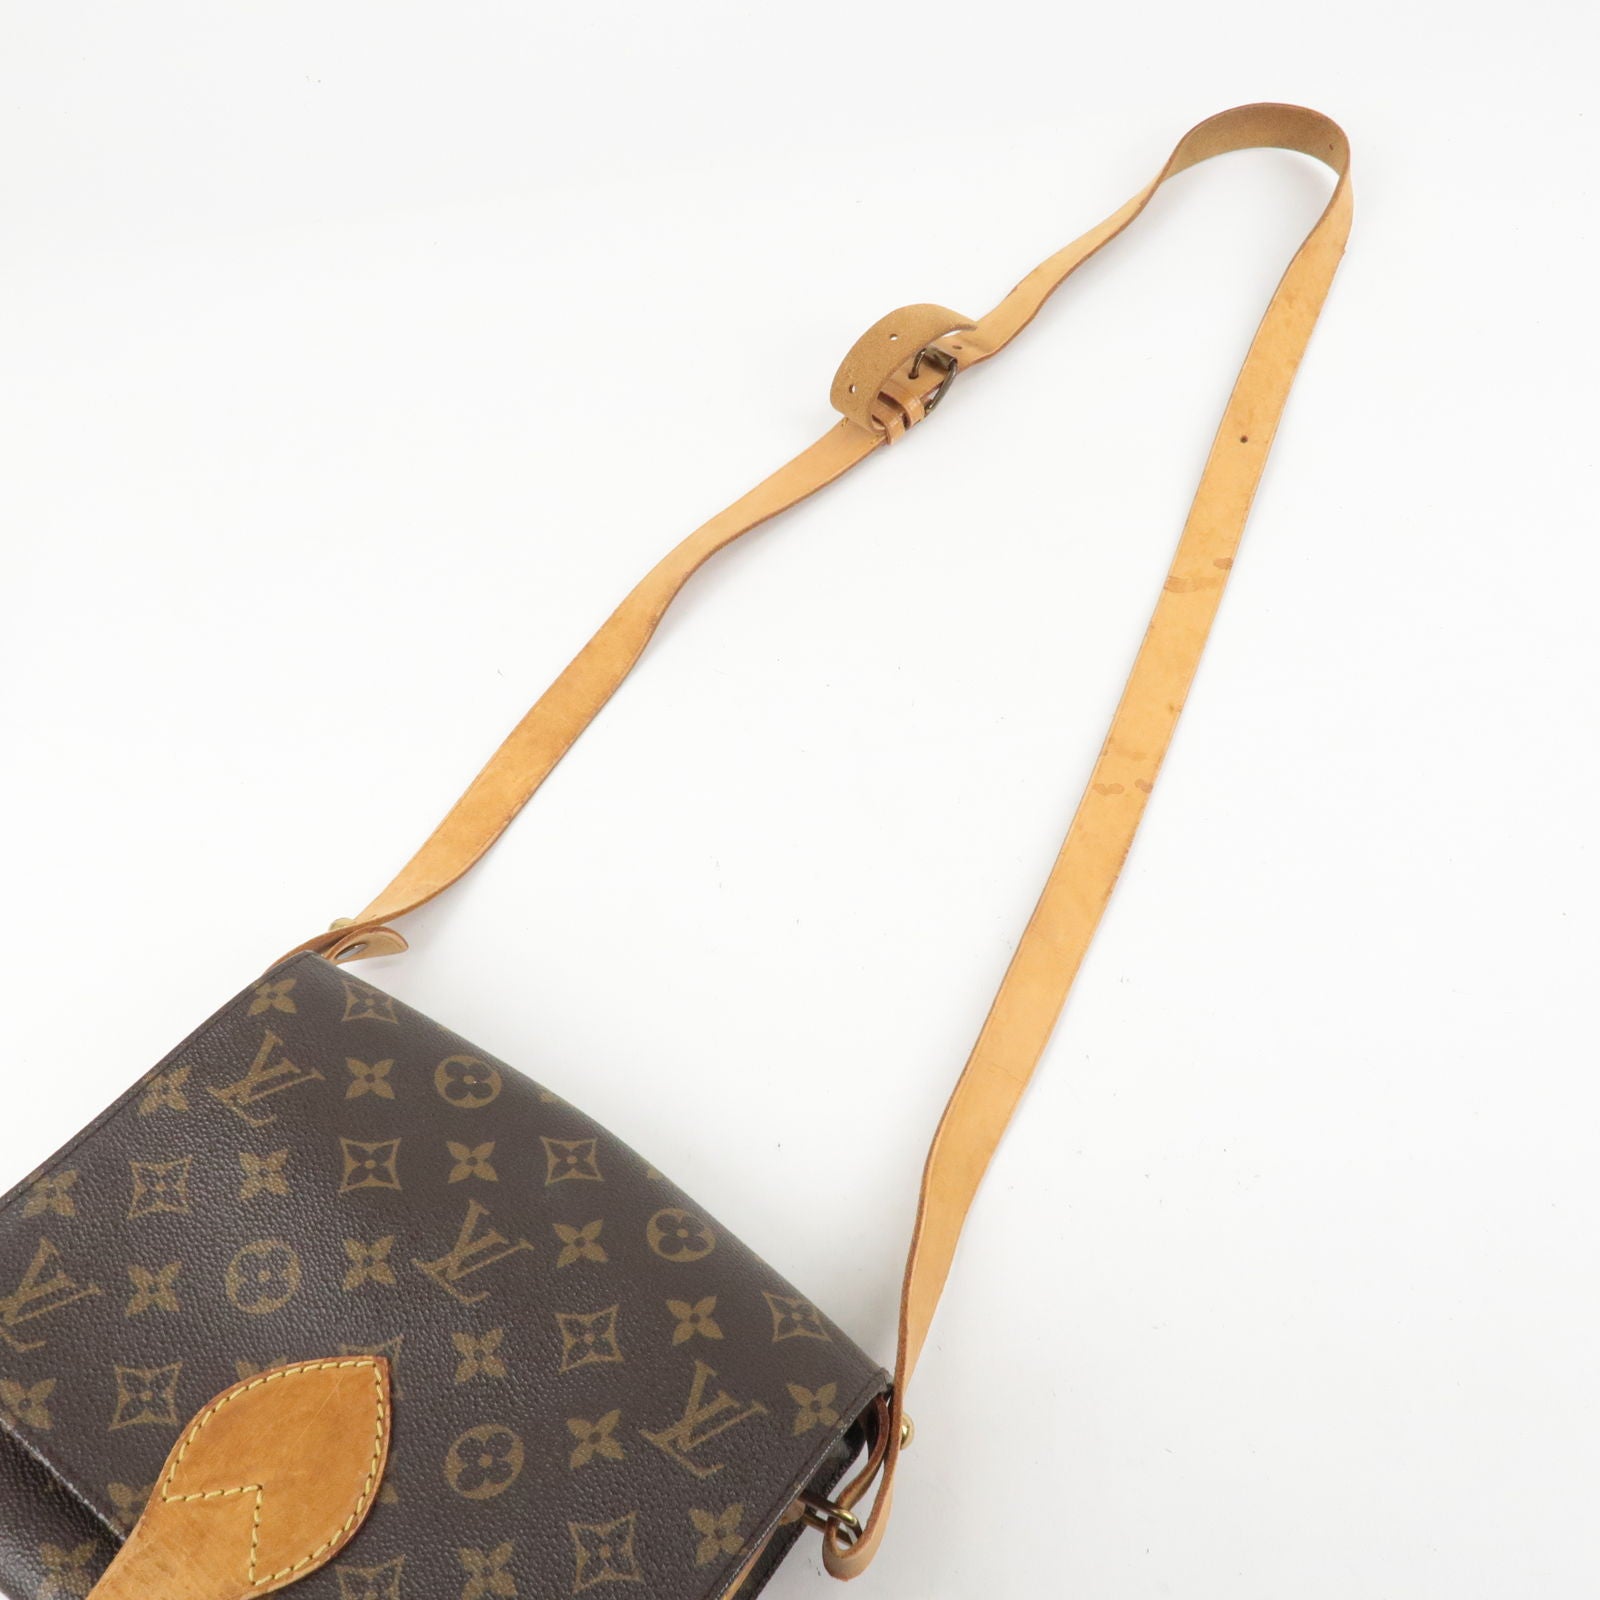 Louis Vuitton 2020 Pre-owned Limited Edition Monogram Two-Way Bag